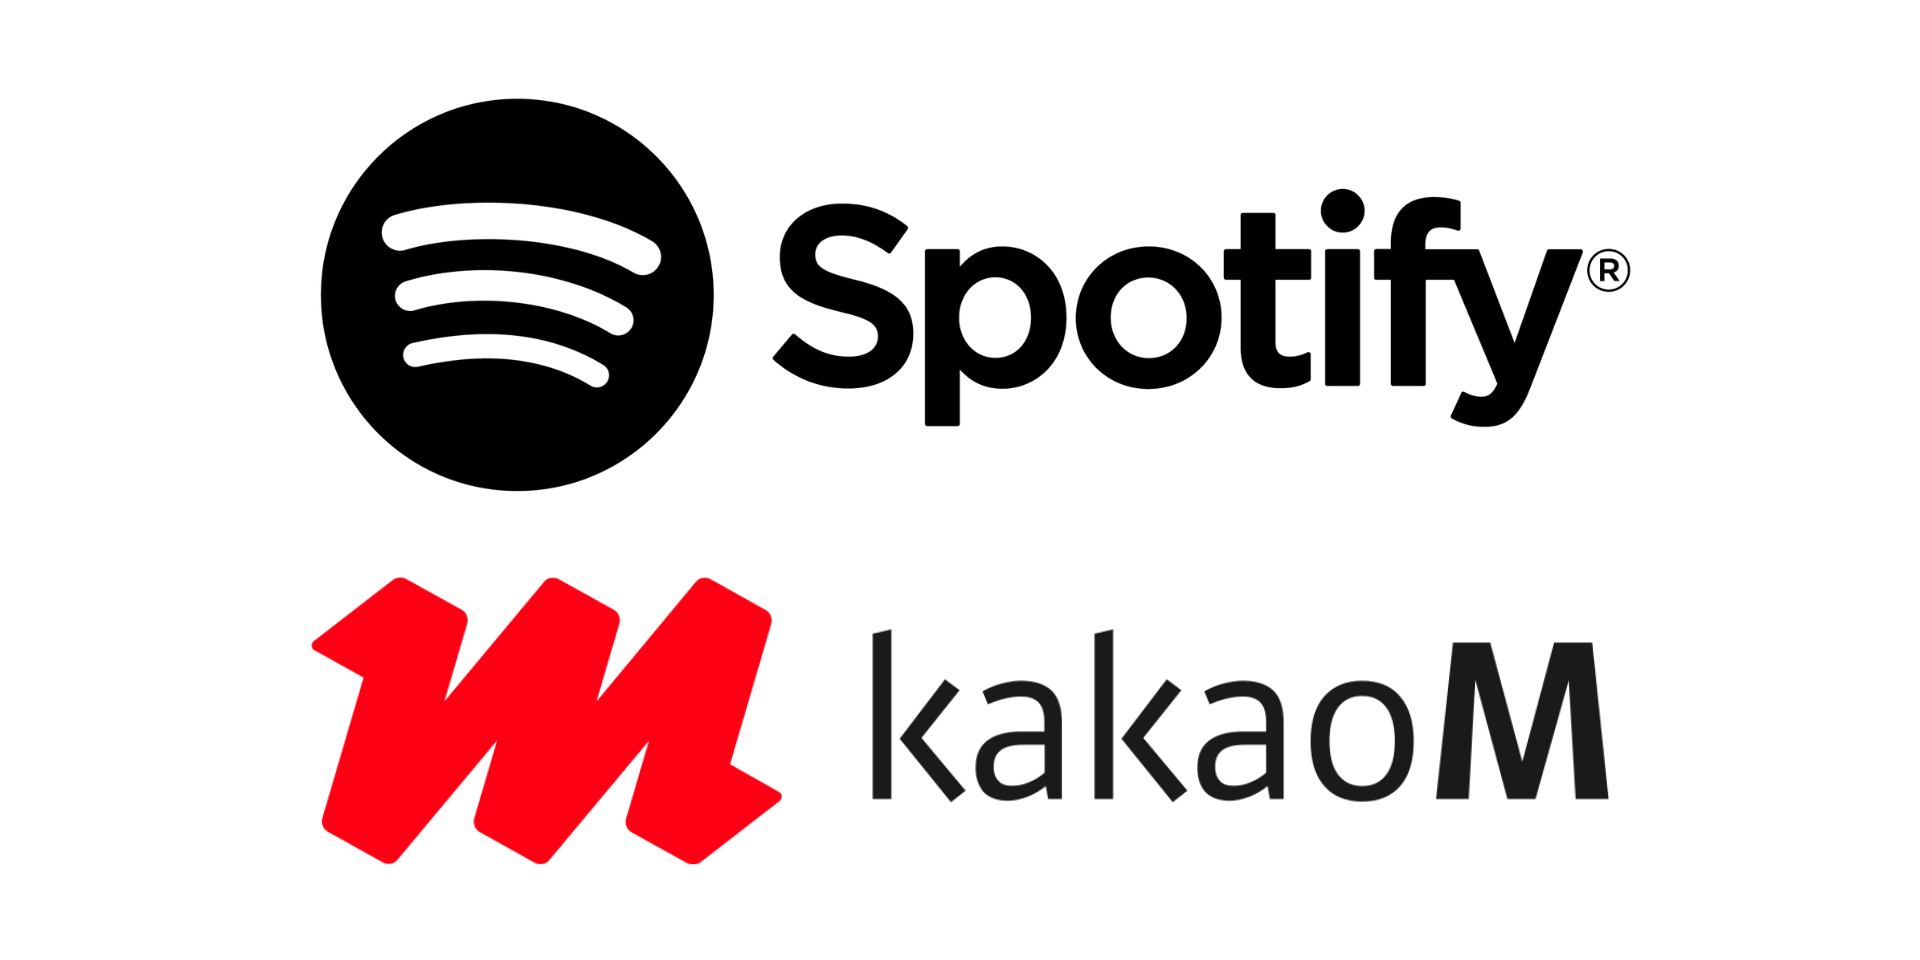 K Pop Songs Under Kakao M Are No Longer Available On Spotify